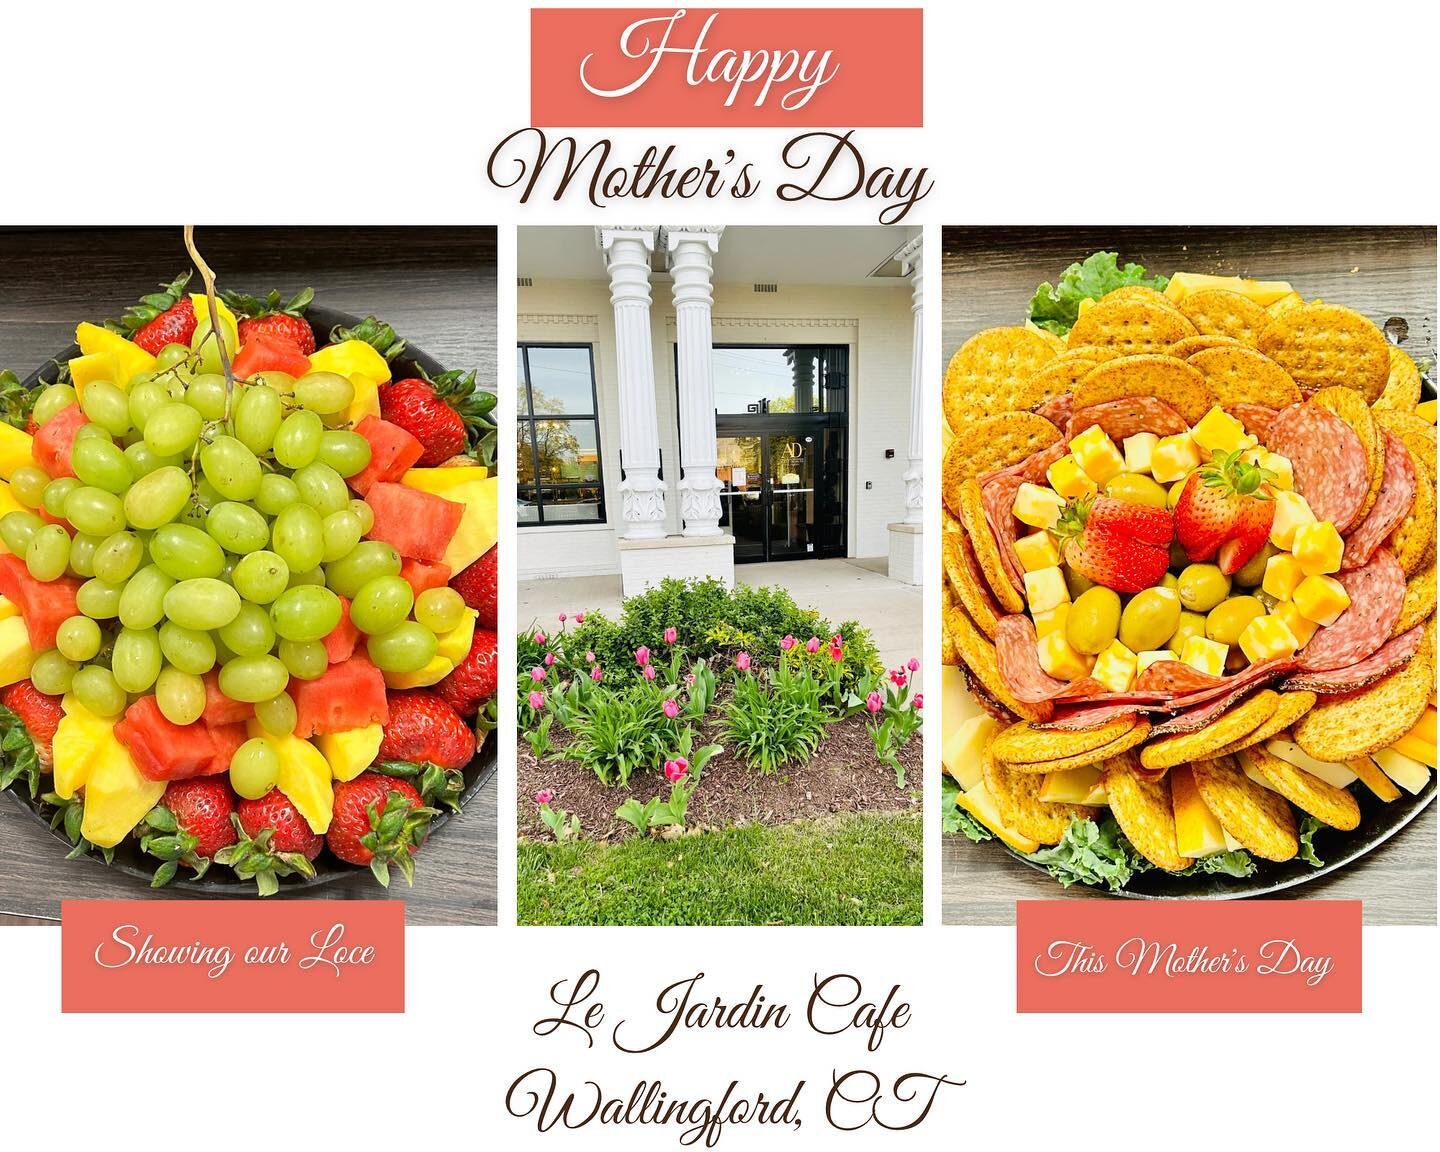 On Mother&rsquo;s Day, we hope you all feel honoured for all your years of caring for your children and grandchildren.
And everyday, we hope you feel how loved you are&hellip;
Happy Mother&rsquo;s Day from all of us at Le Jardin Cafe #happymothersday